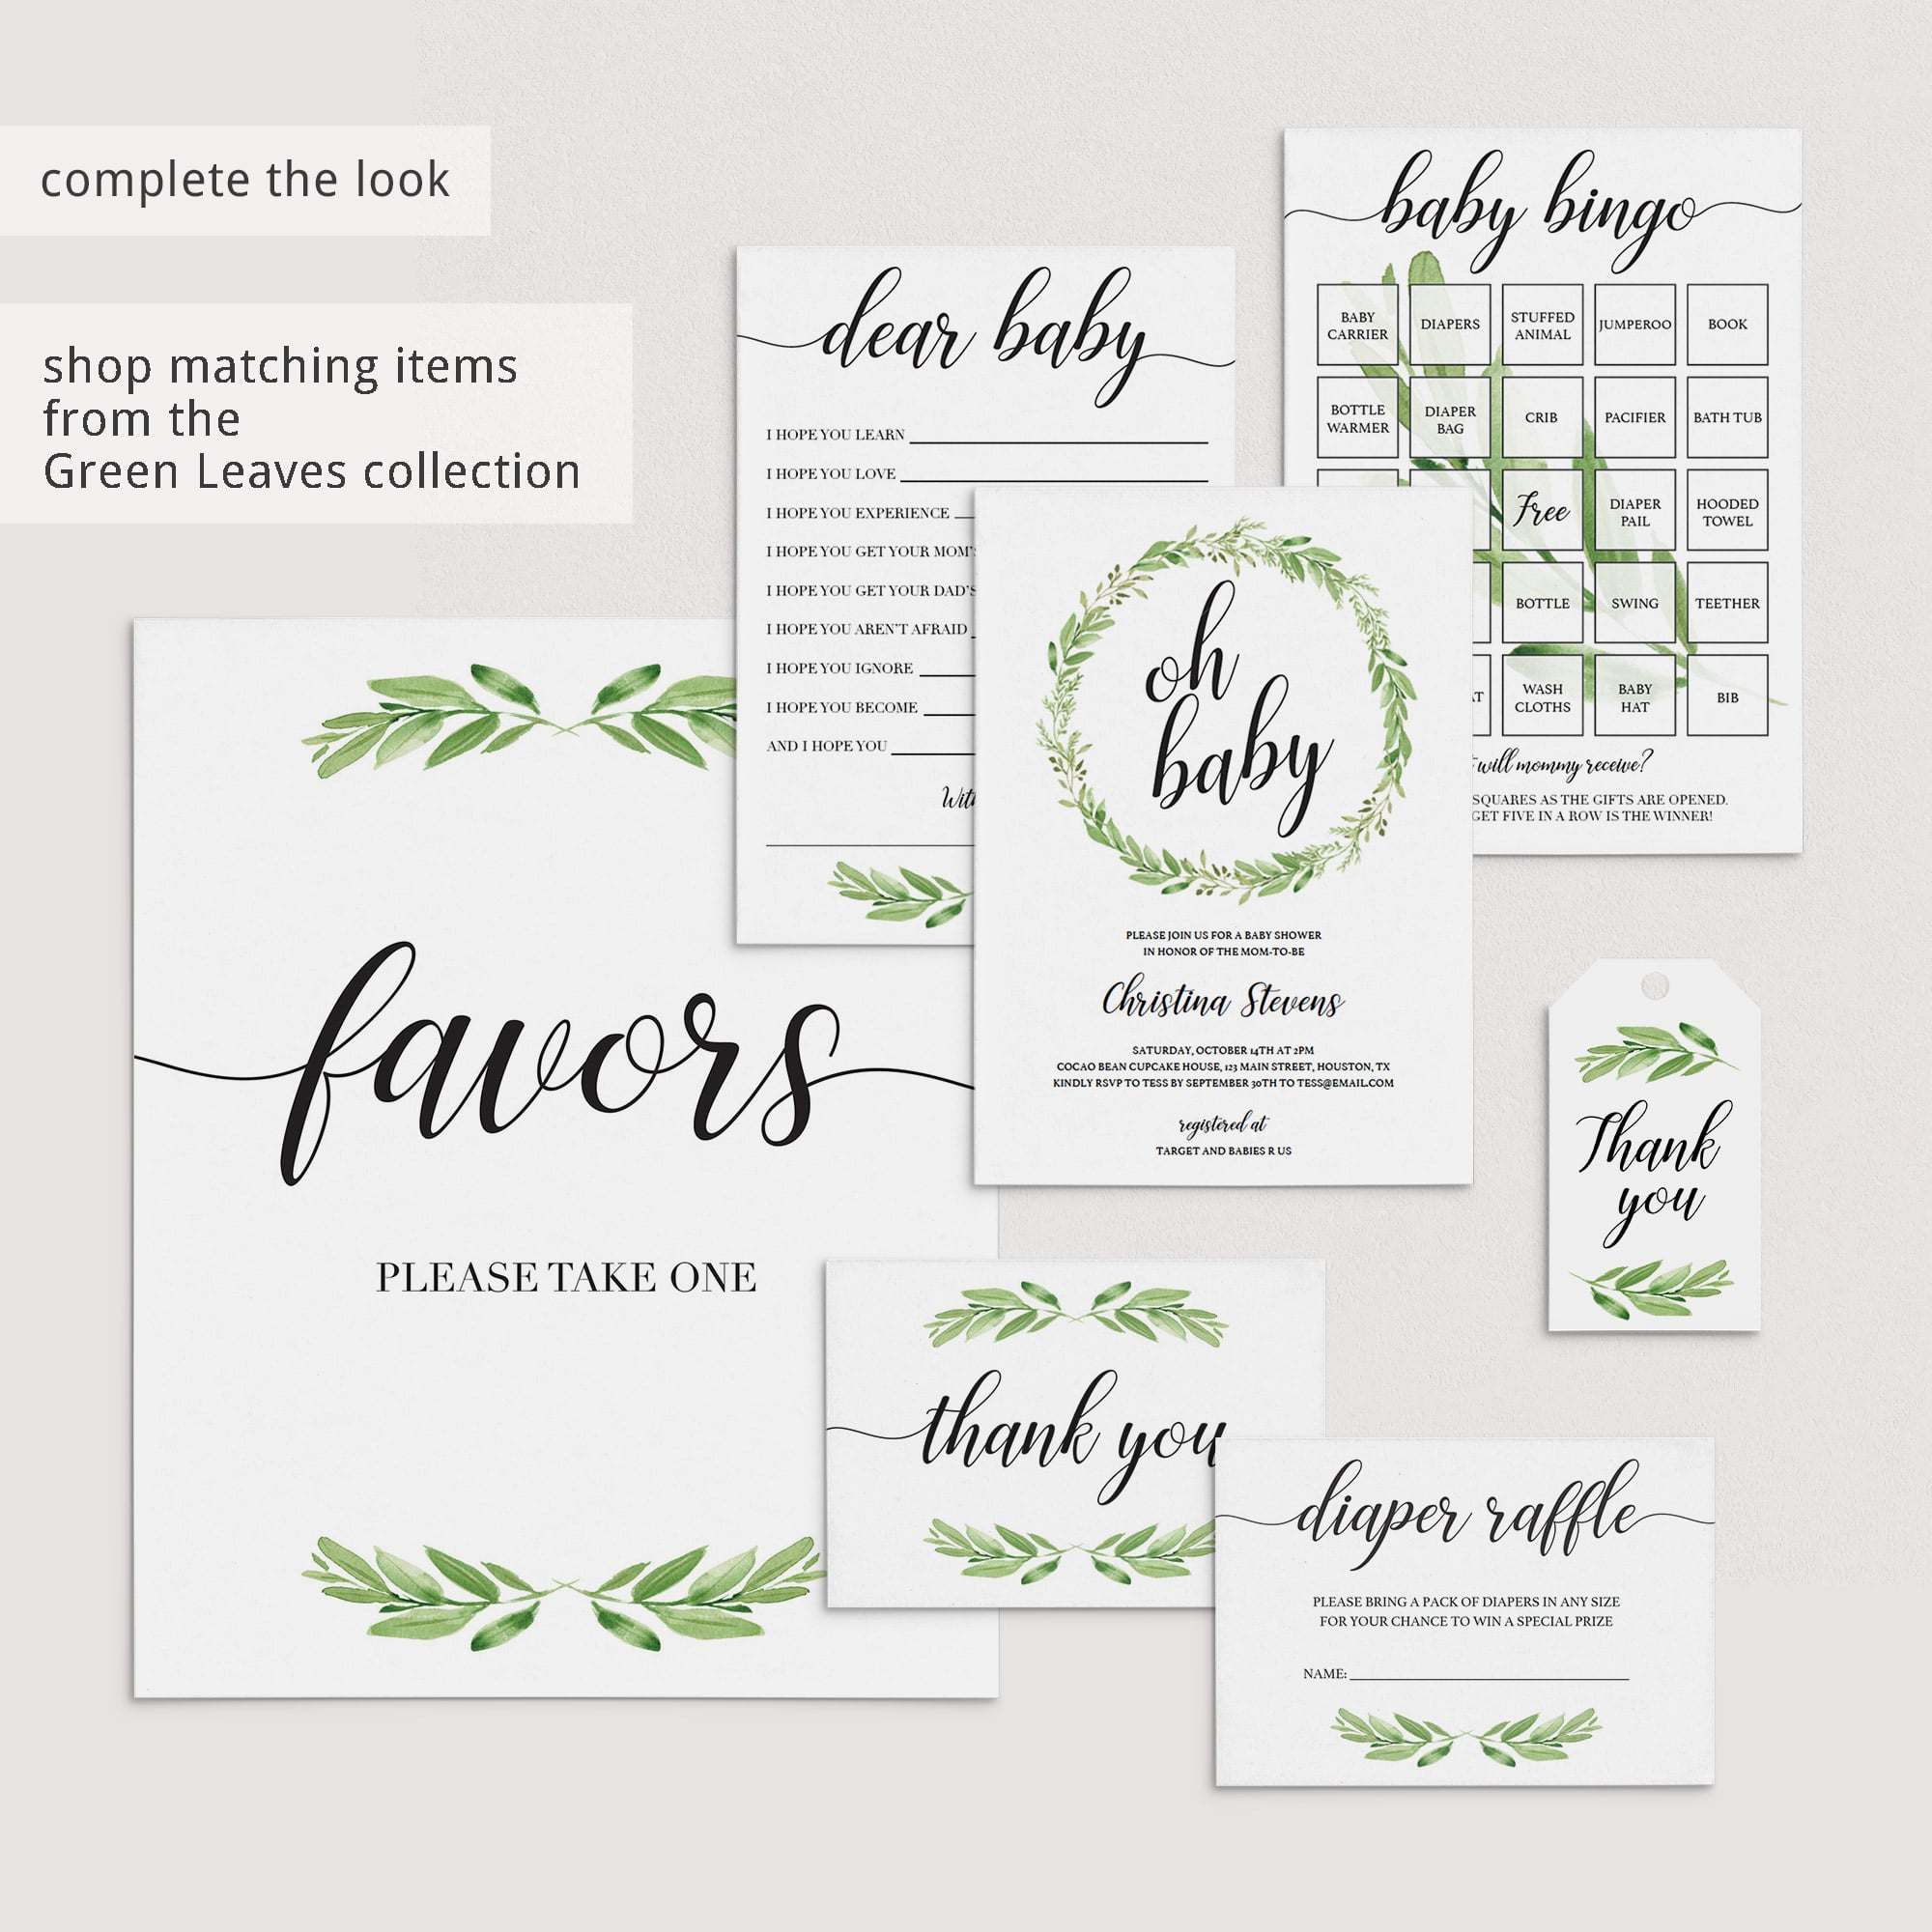 Green leaf baby shower ideas by LittleSizzle